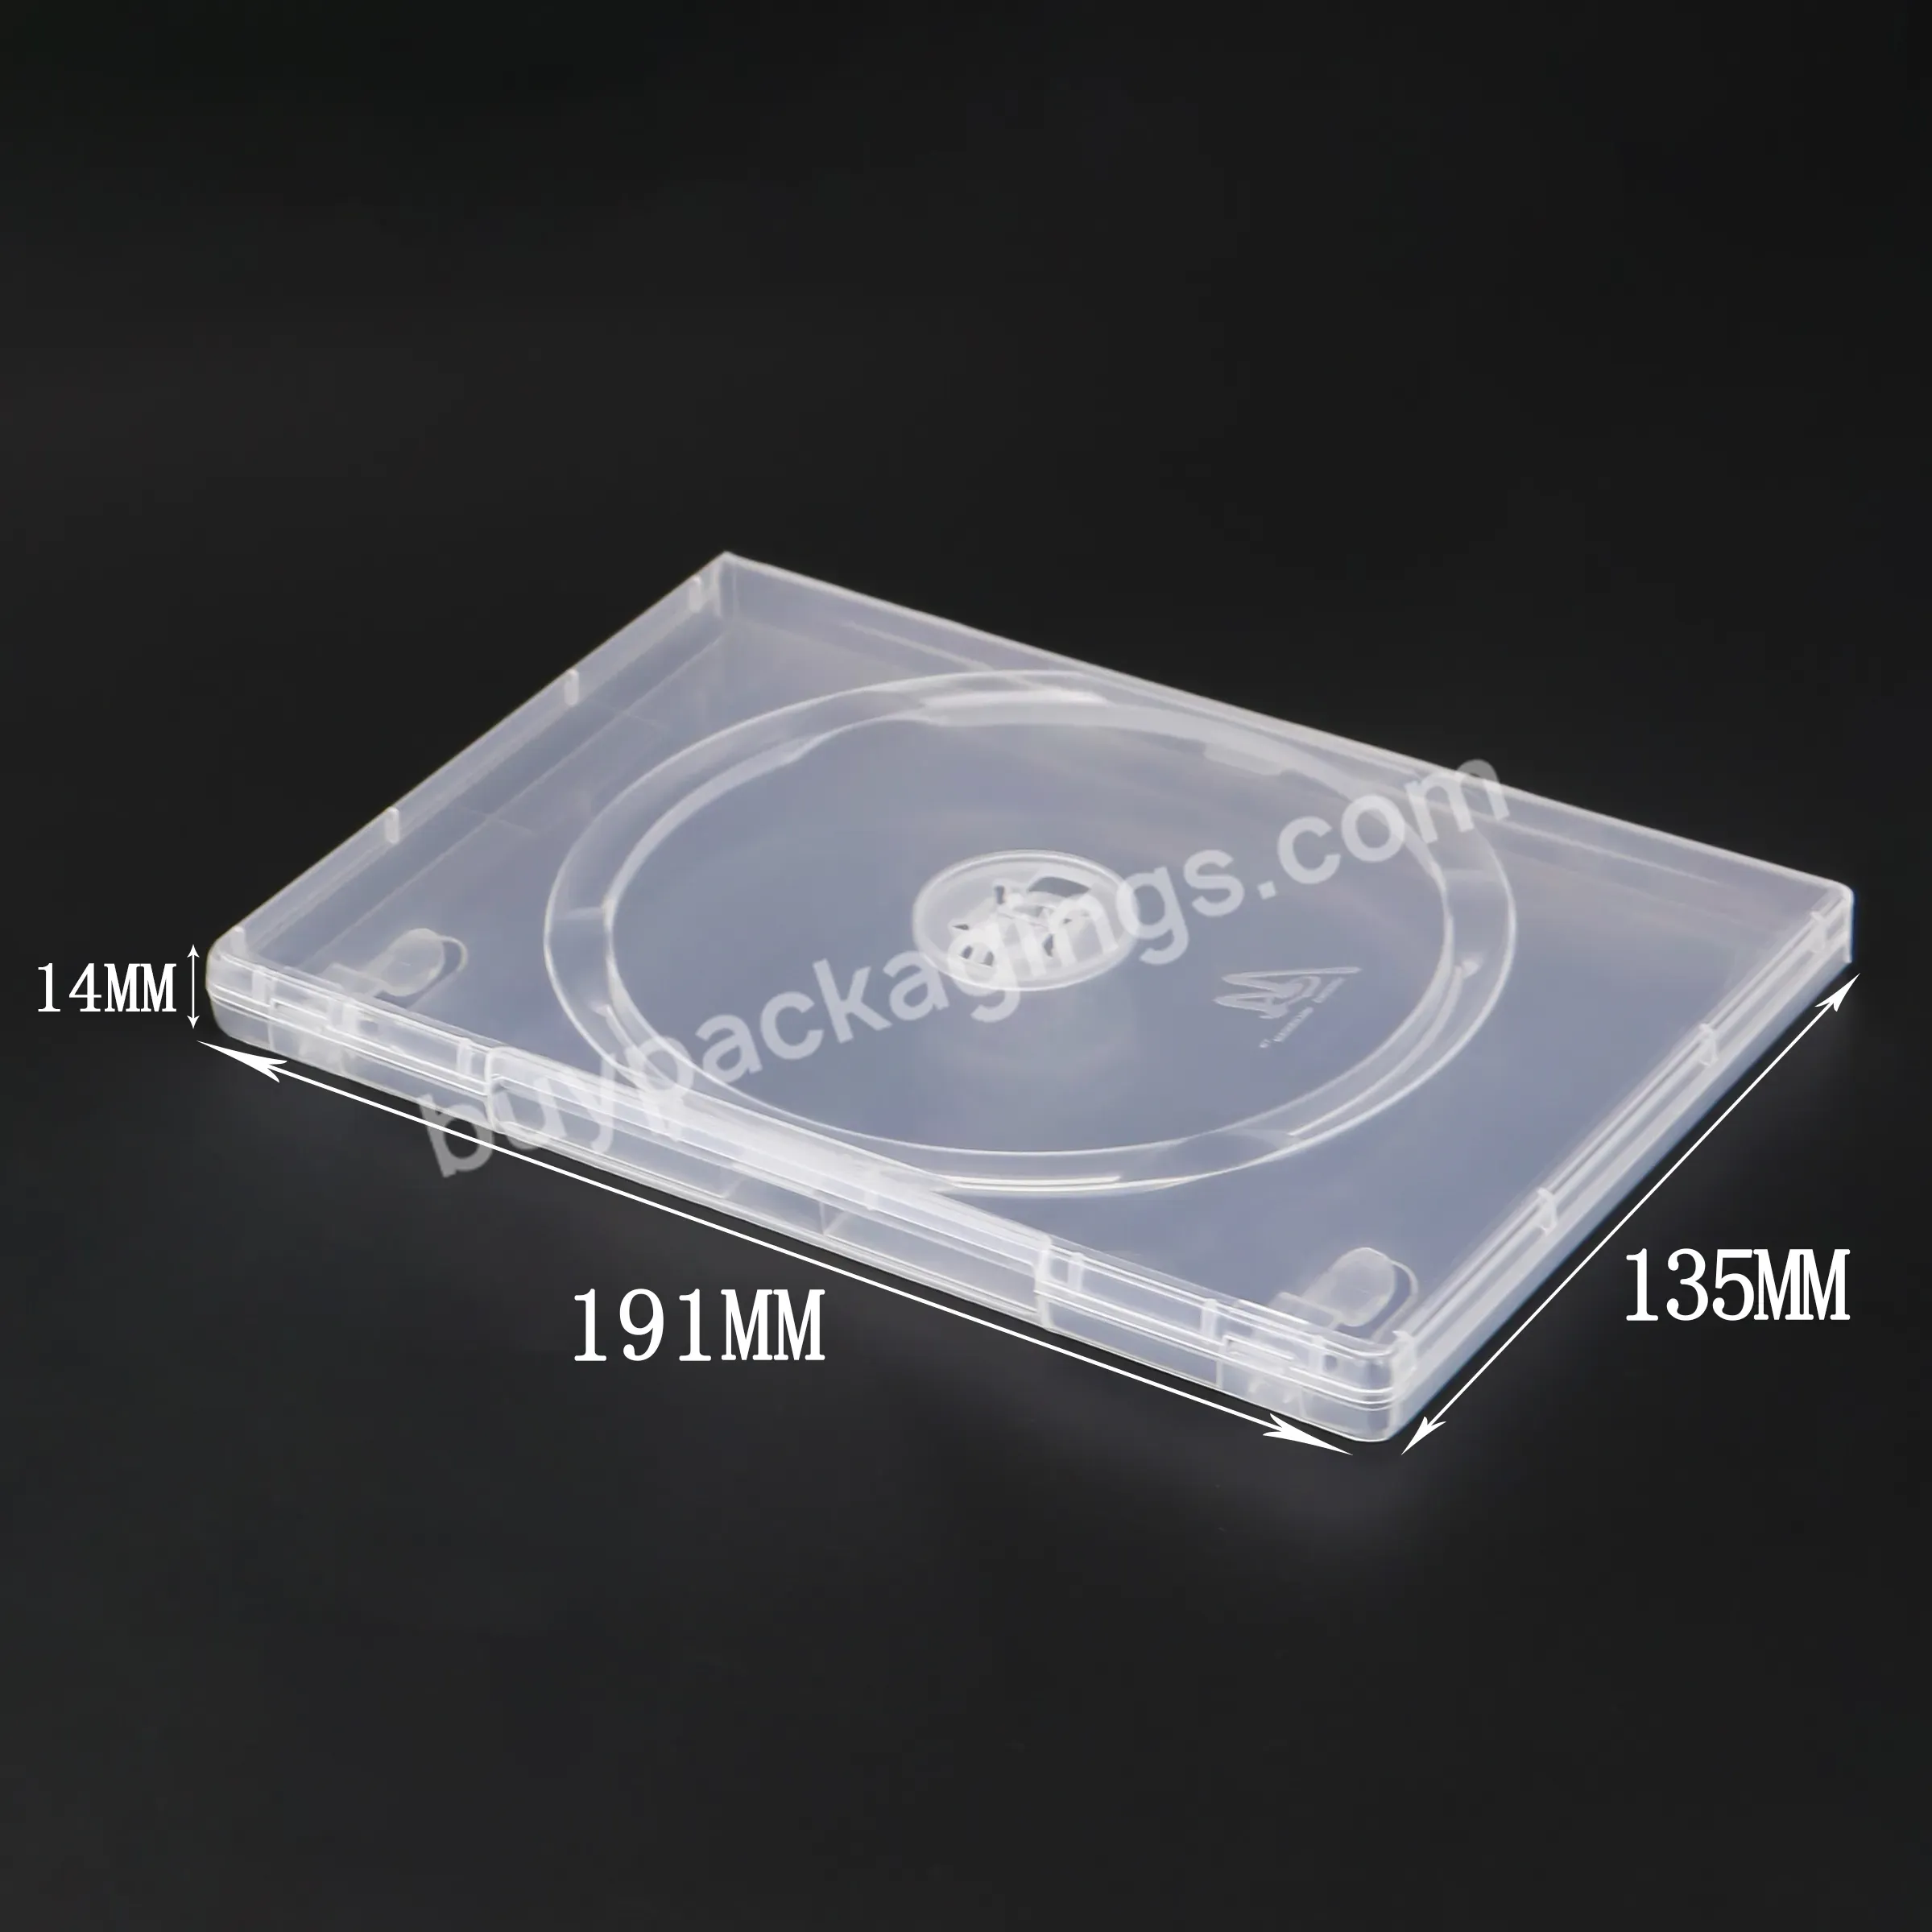 Wholesale Disc Cd Dvd Case Storage Album Collection Holder Box Blank Cd Case Packing Movie Music M-lock Dvd Box - Buy M-lock Dvd Box,Blank Cd Case,Disc Cd Dvd Case.